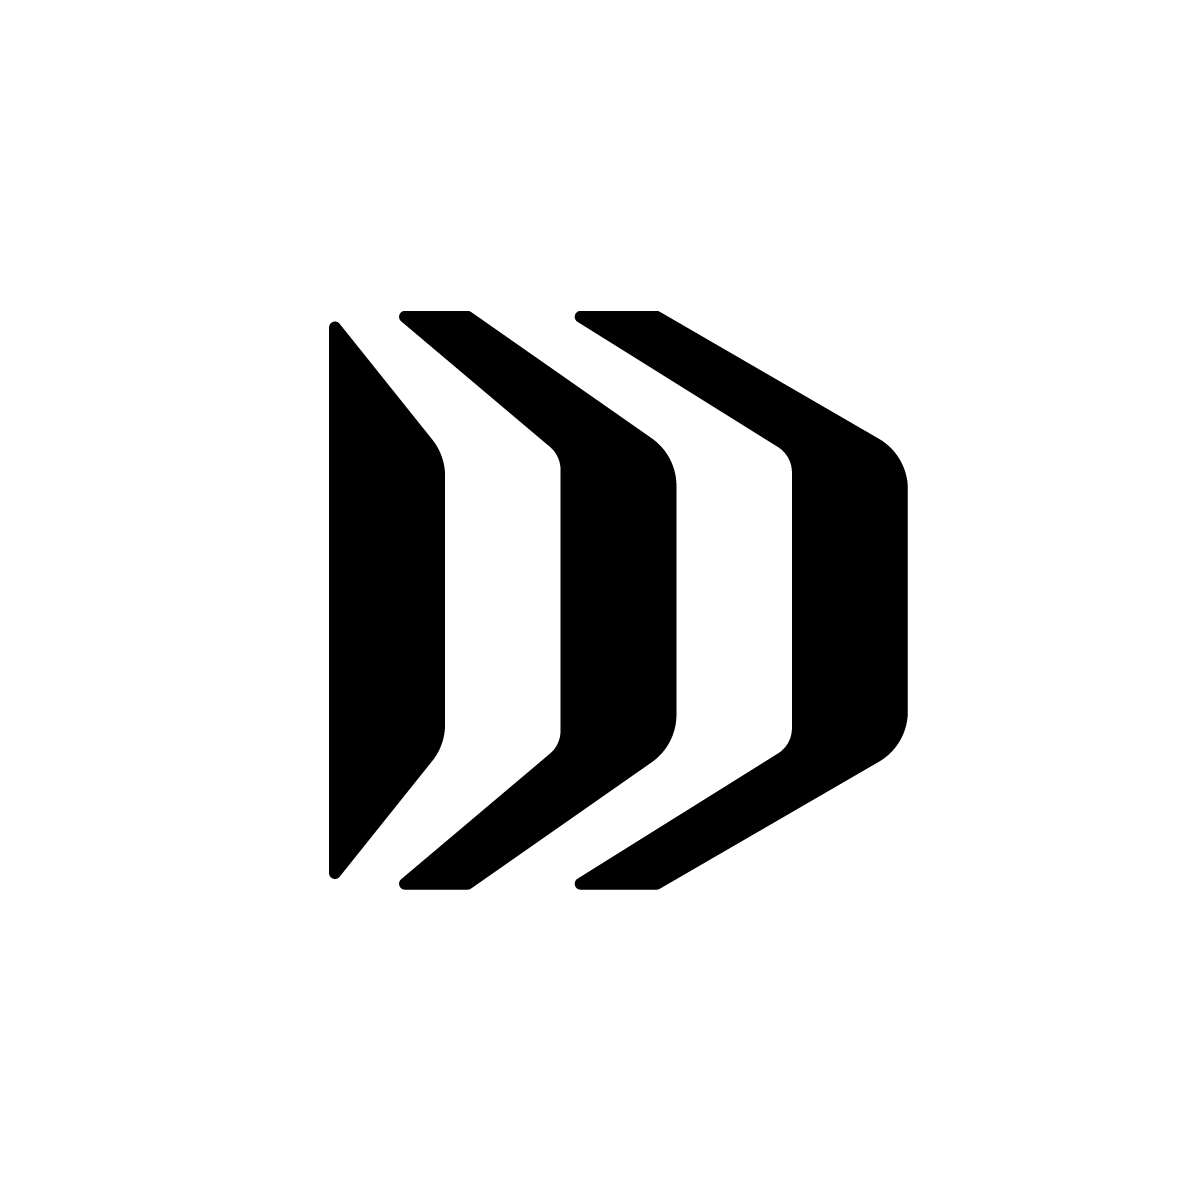 Discover our Simple DD Monogram Logo – a modern and clean representation of two letters D